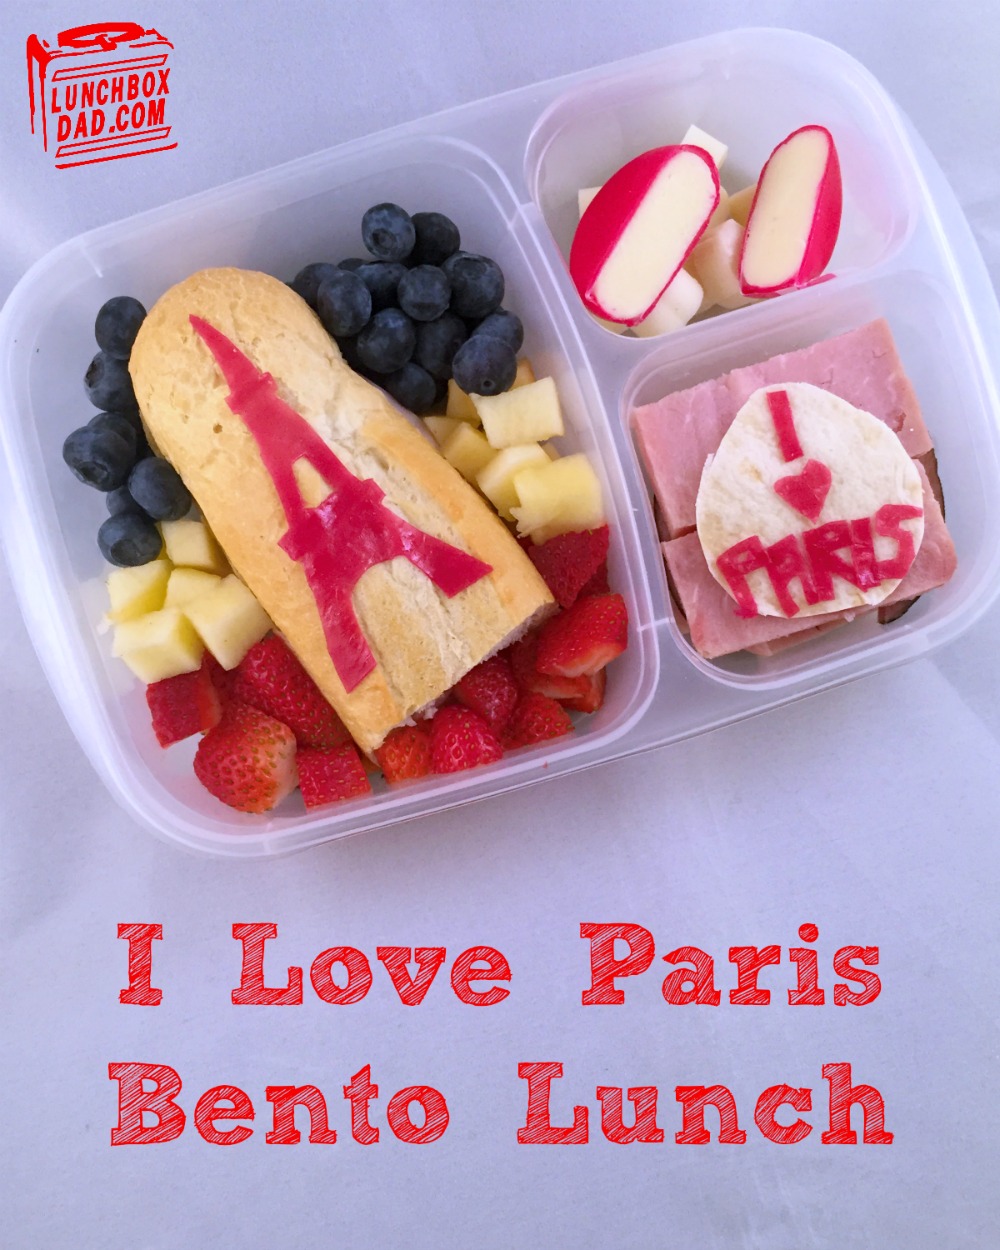 I love Paris French bento lunch